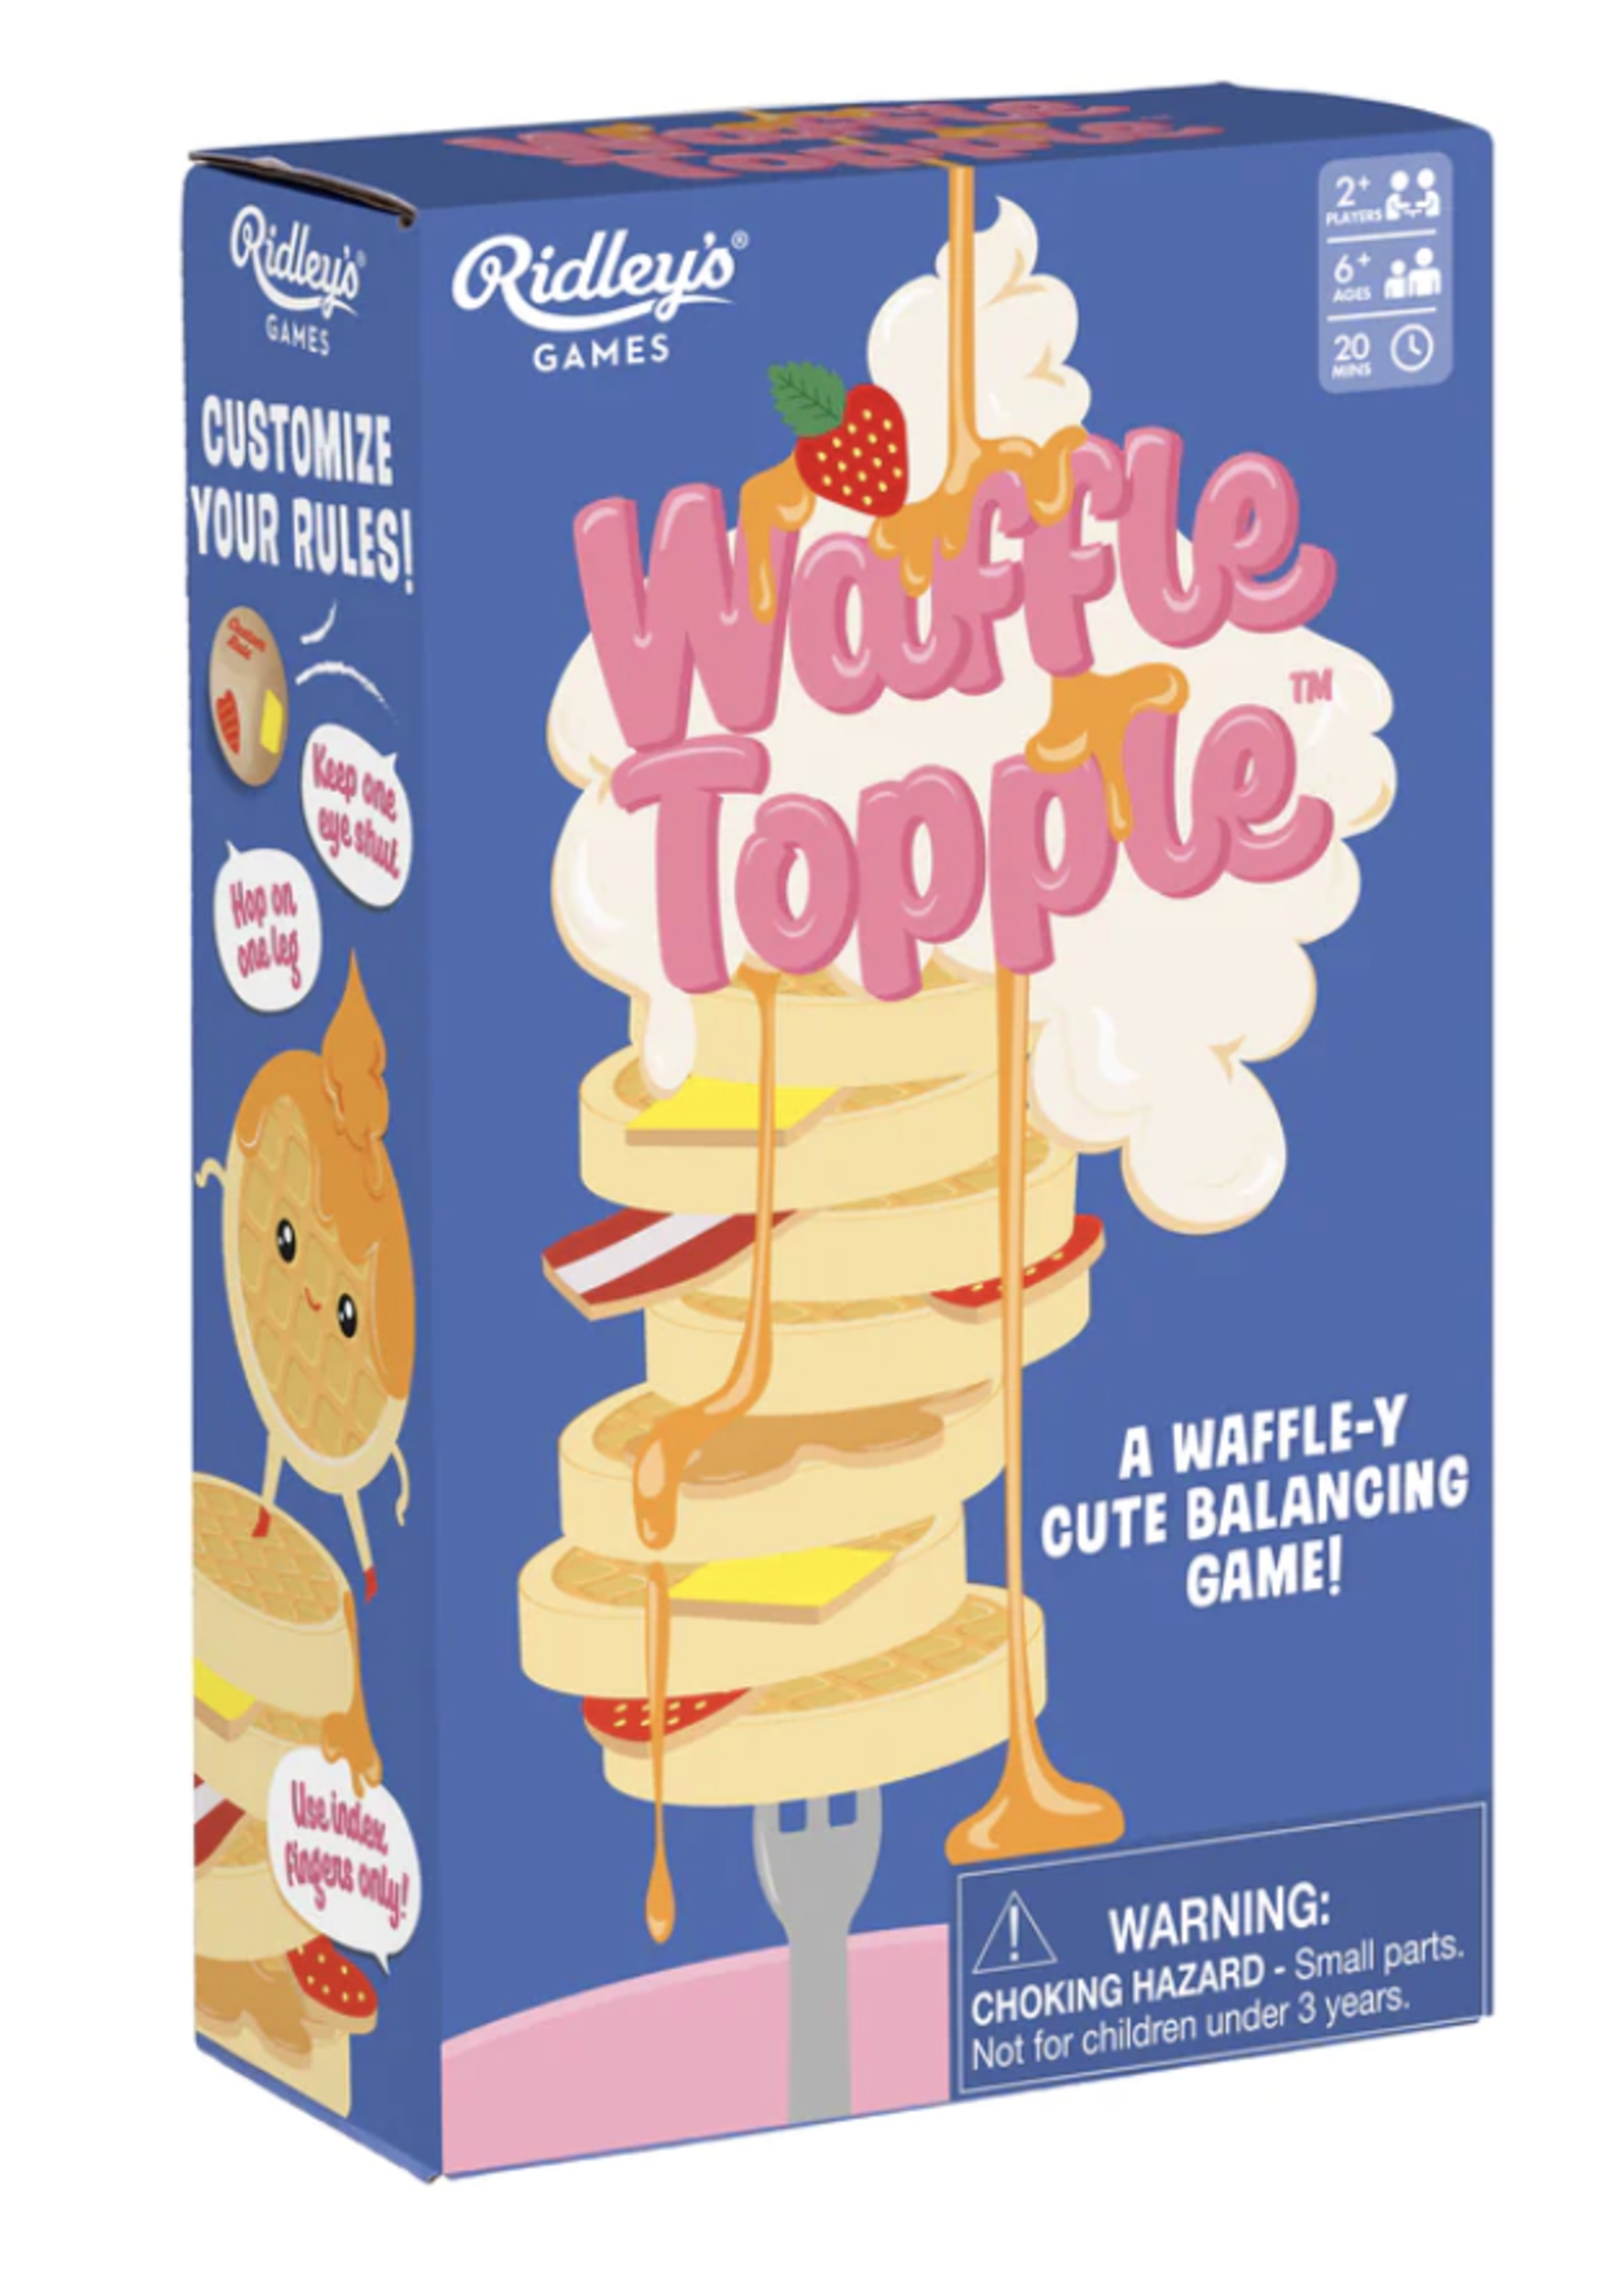 Ridley's Games Waffle Topple